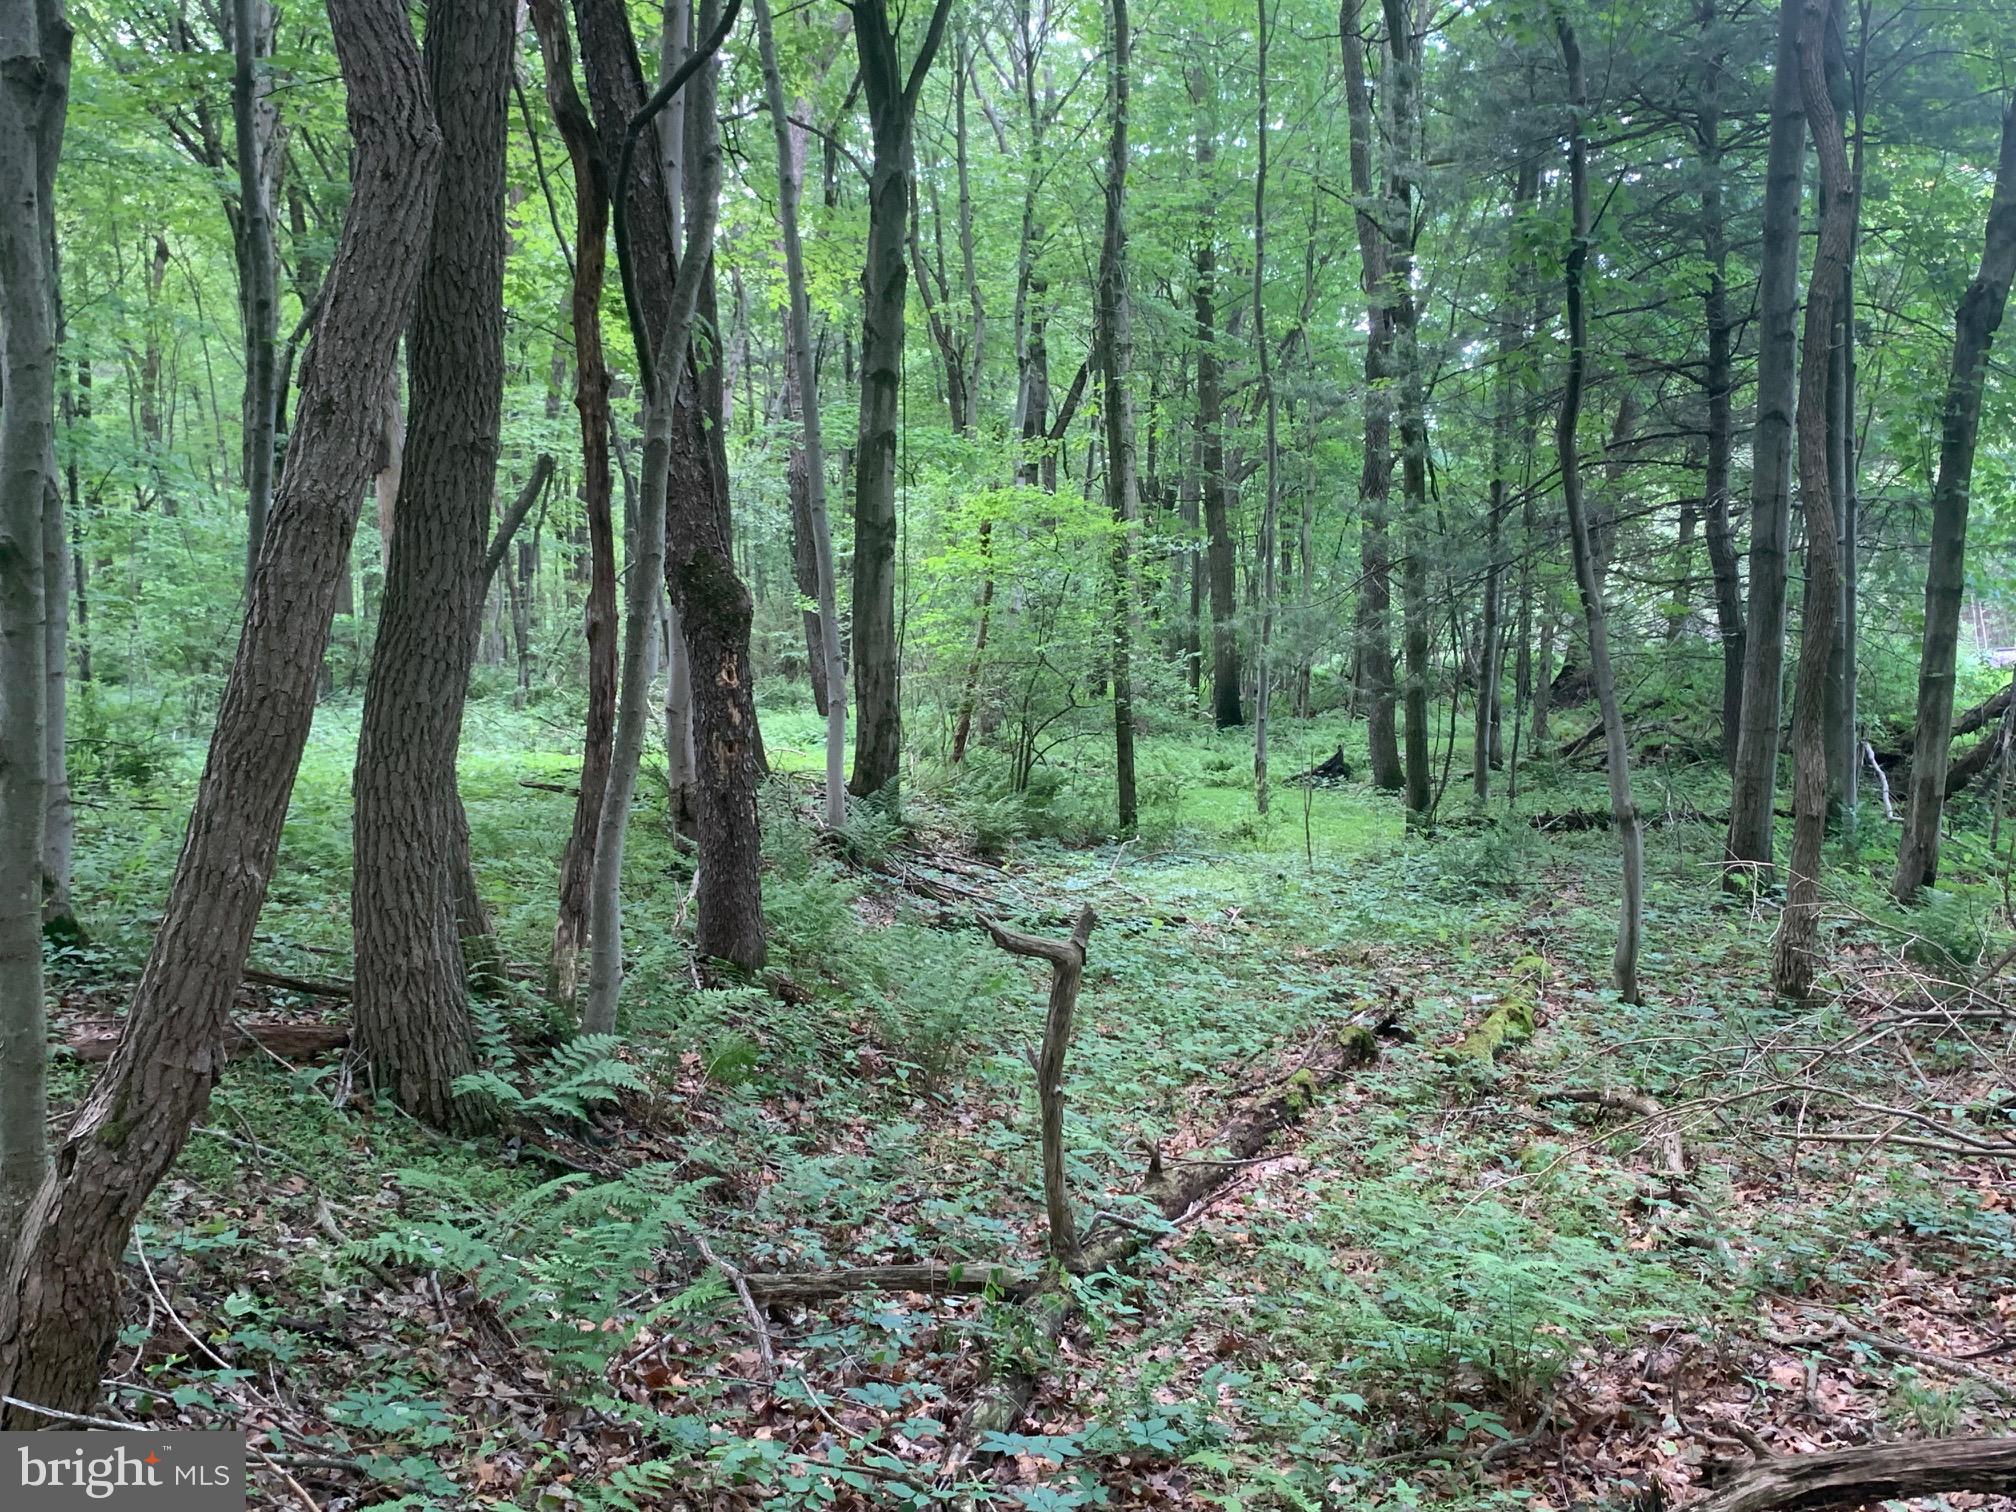 a view of a forest